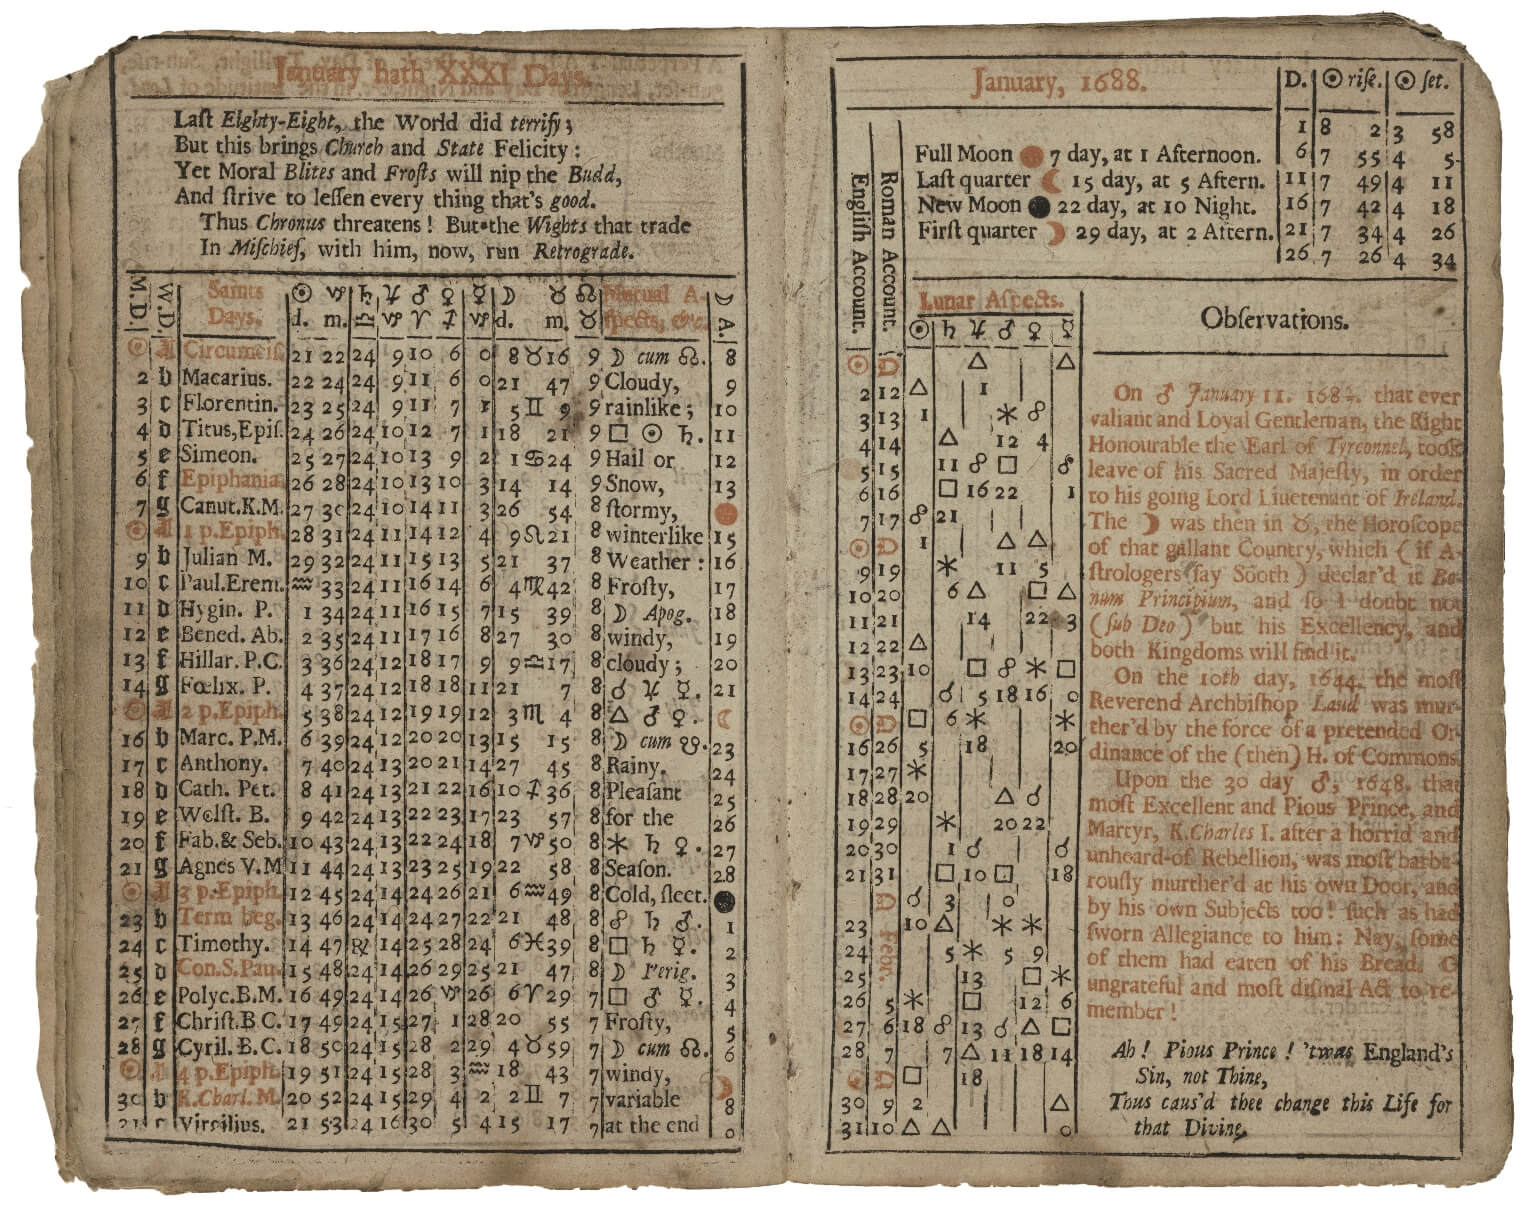 Although many printed almanacs left space for users to add in their own notes, Gadbury here adds in a block of red text labeled "observations" a brief account of recent historical events.